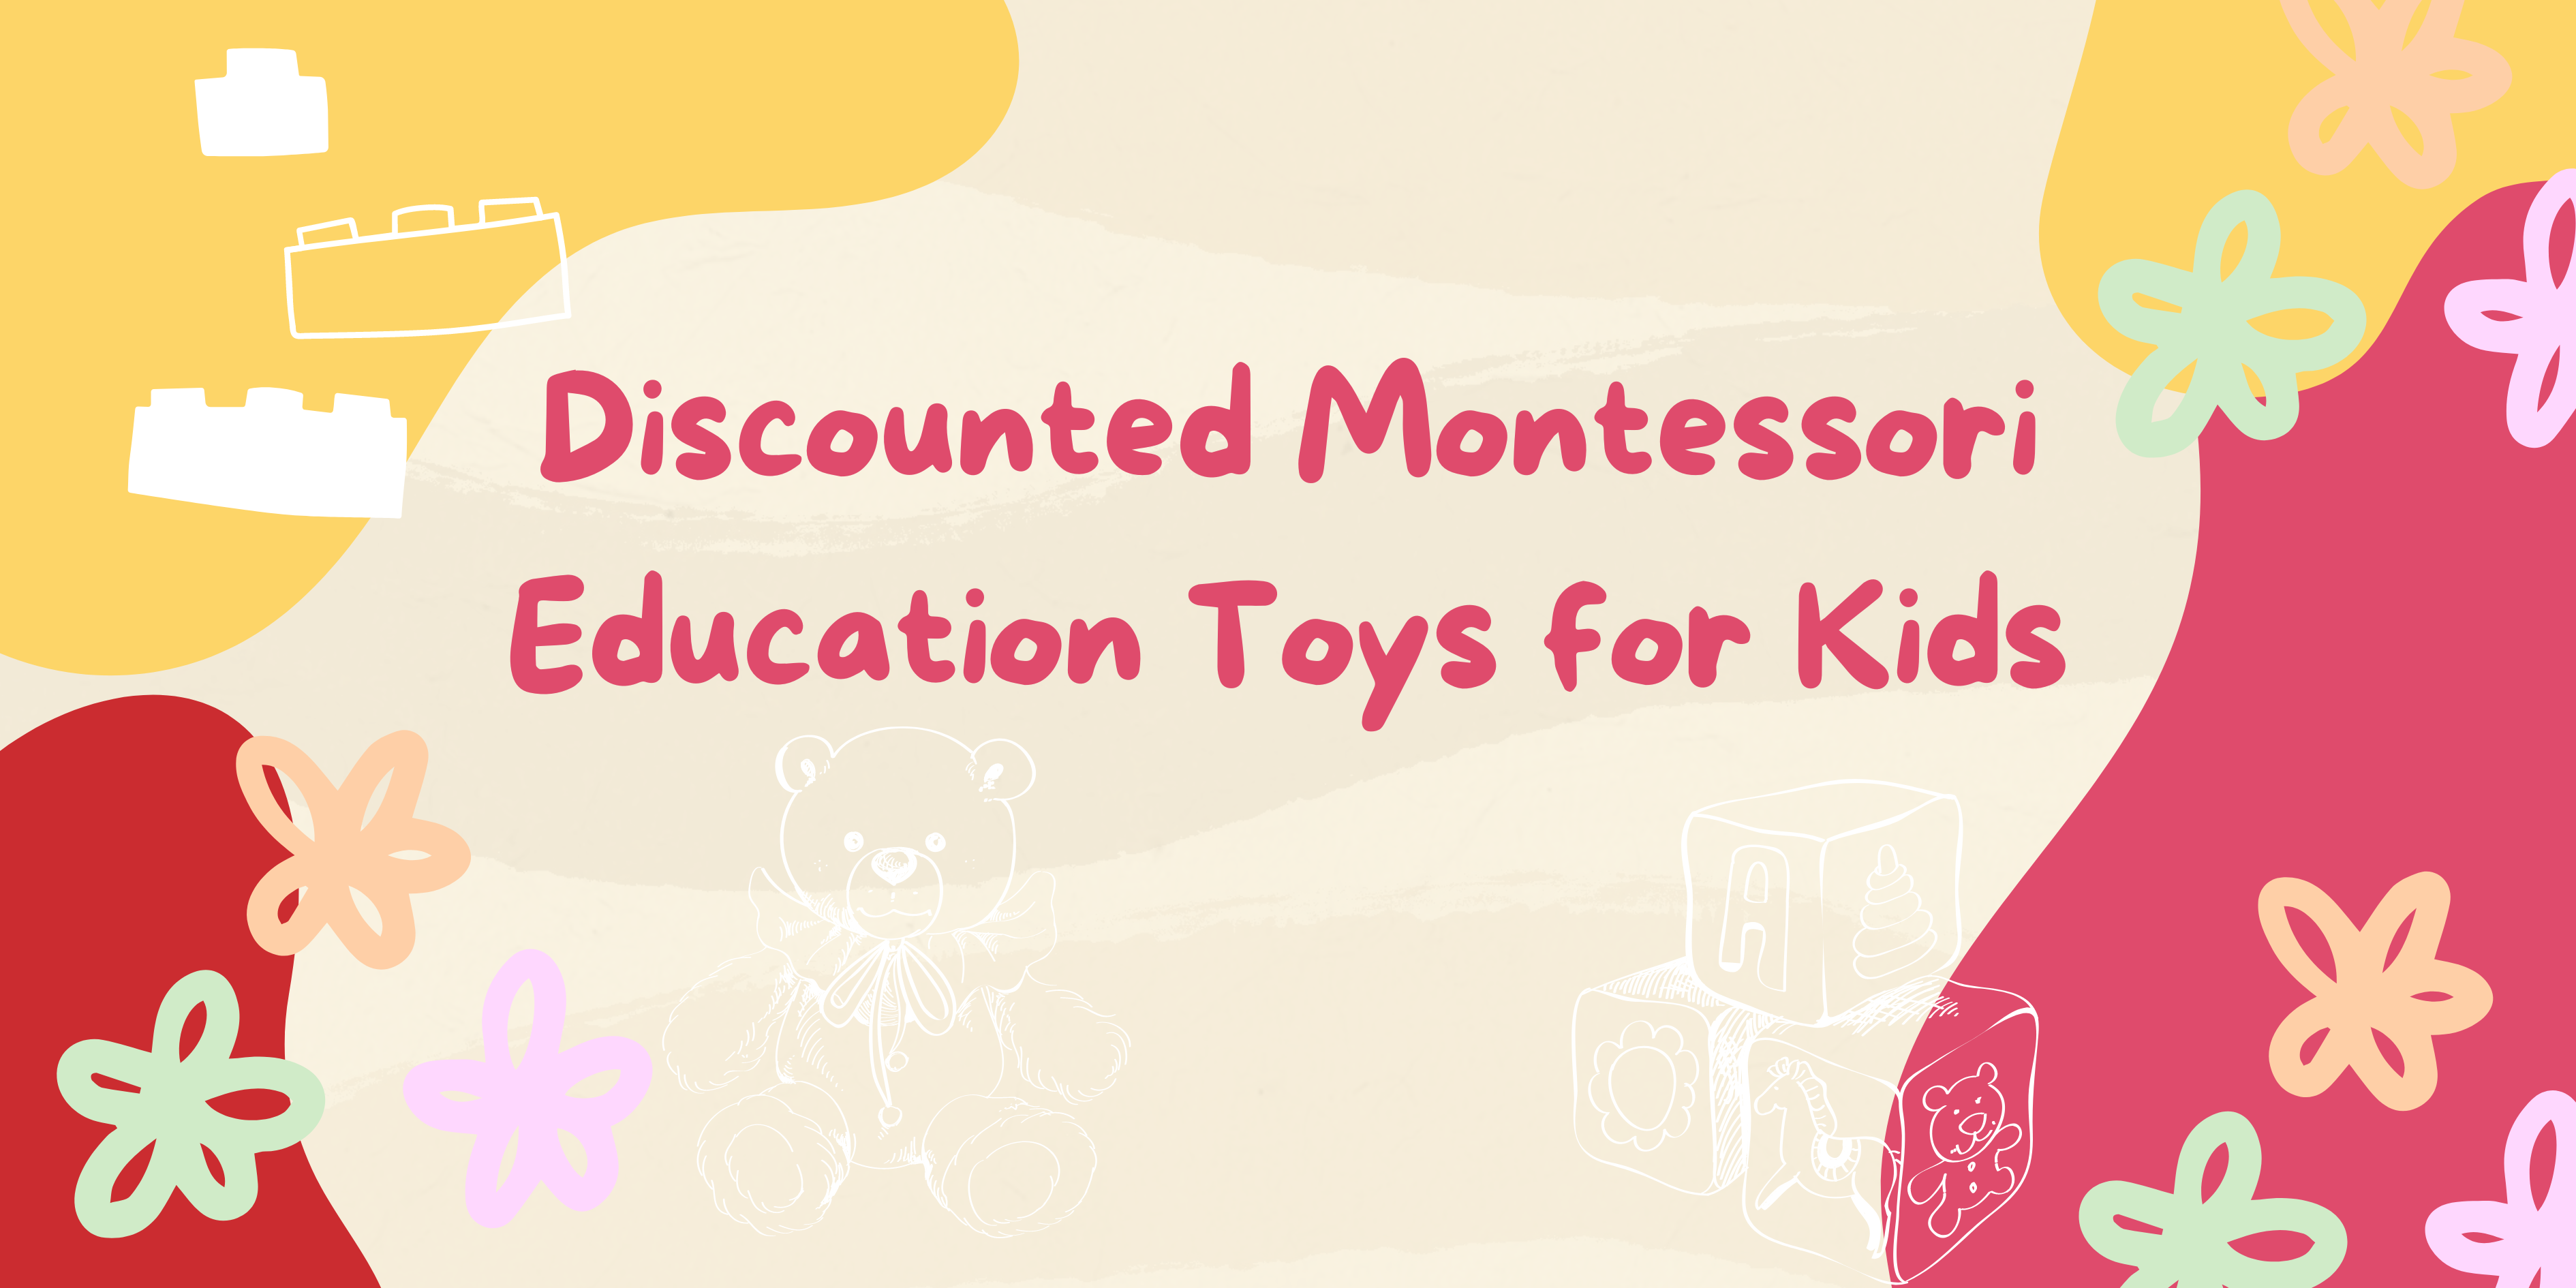 Back-to-School Special: Discounted Montessori Education Toys for the New Academic Year